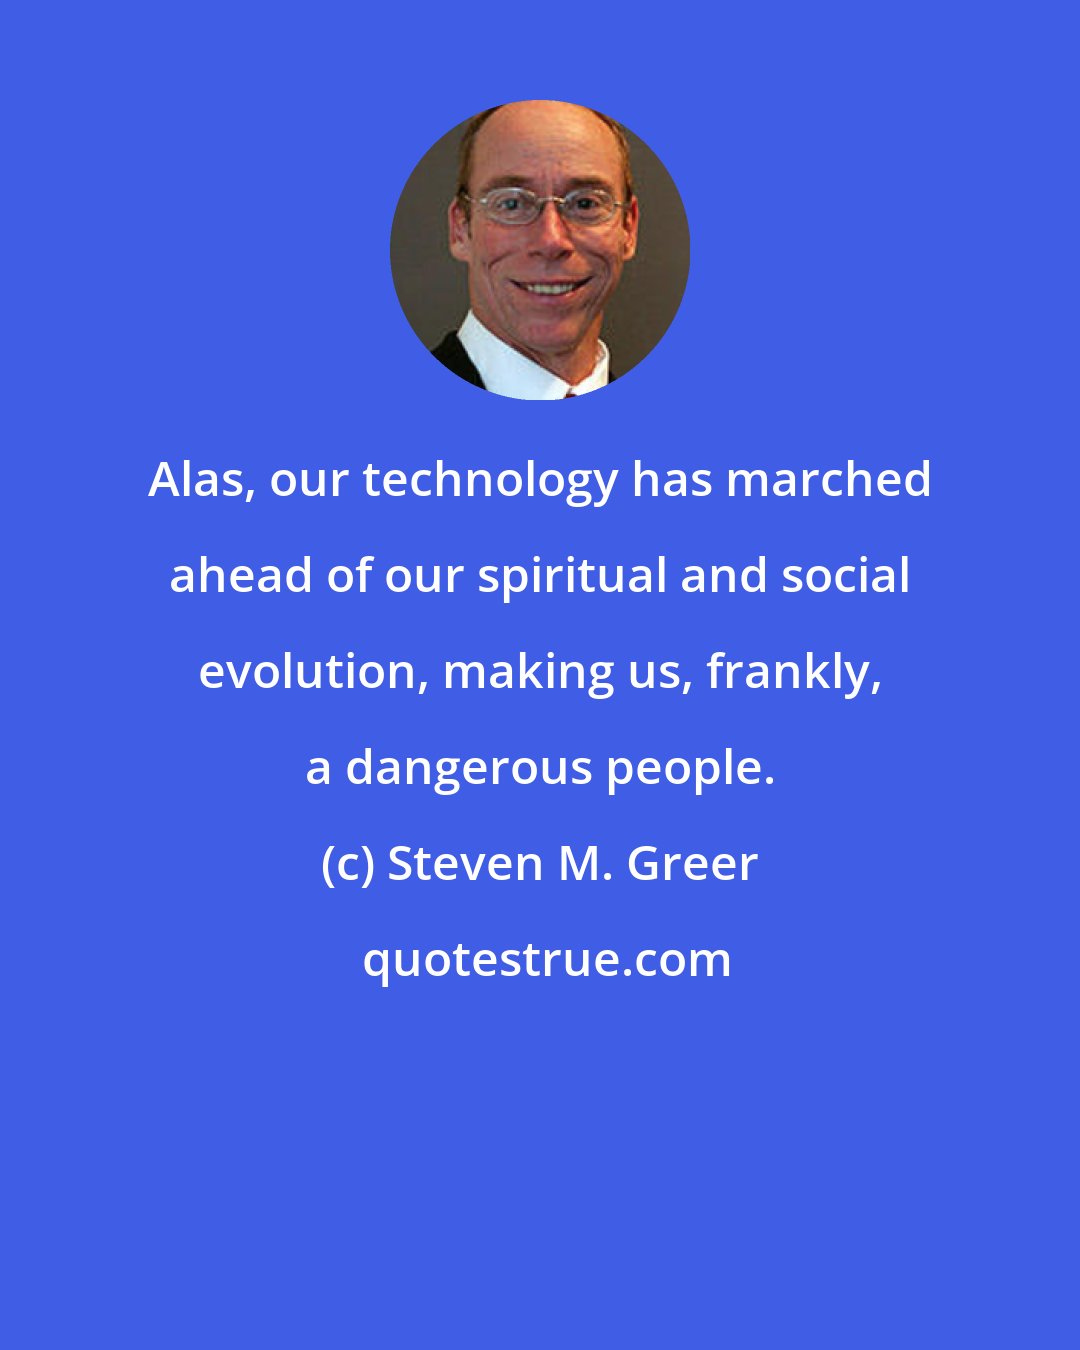 Steven M. Greer: Alas, our technology has marched ahead of our spiritual and social evolution, making us, frankly, a dangerous people.